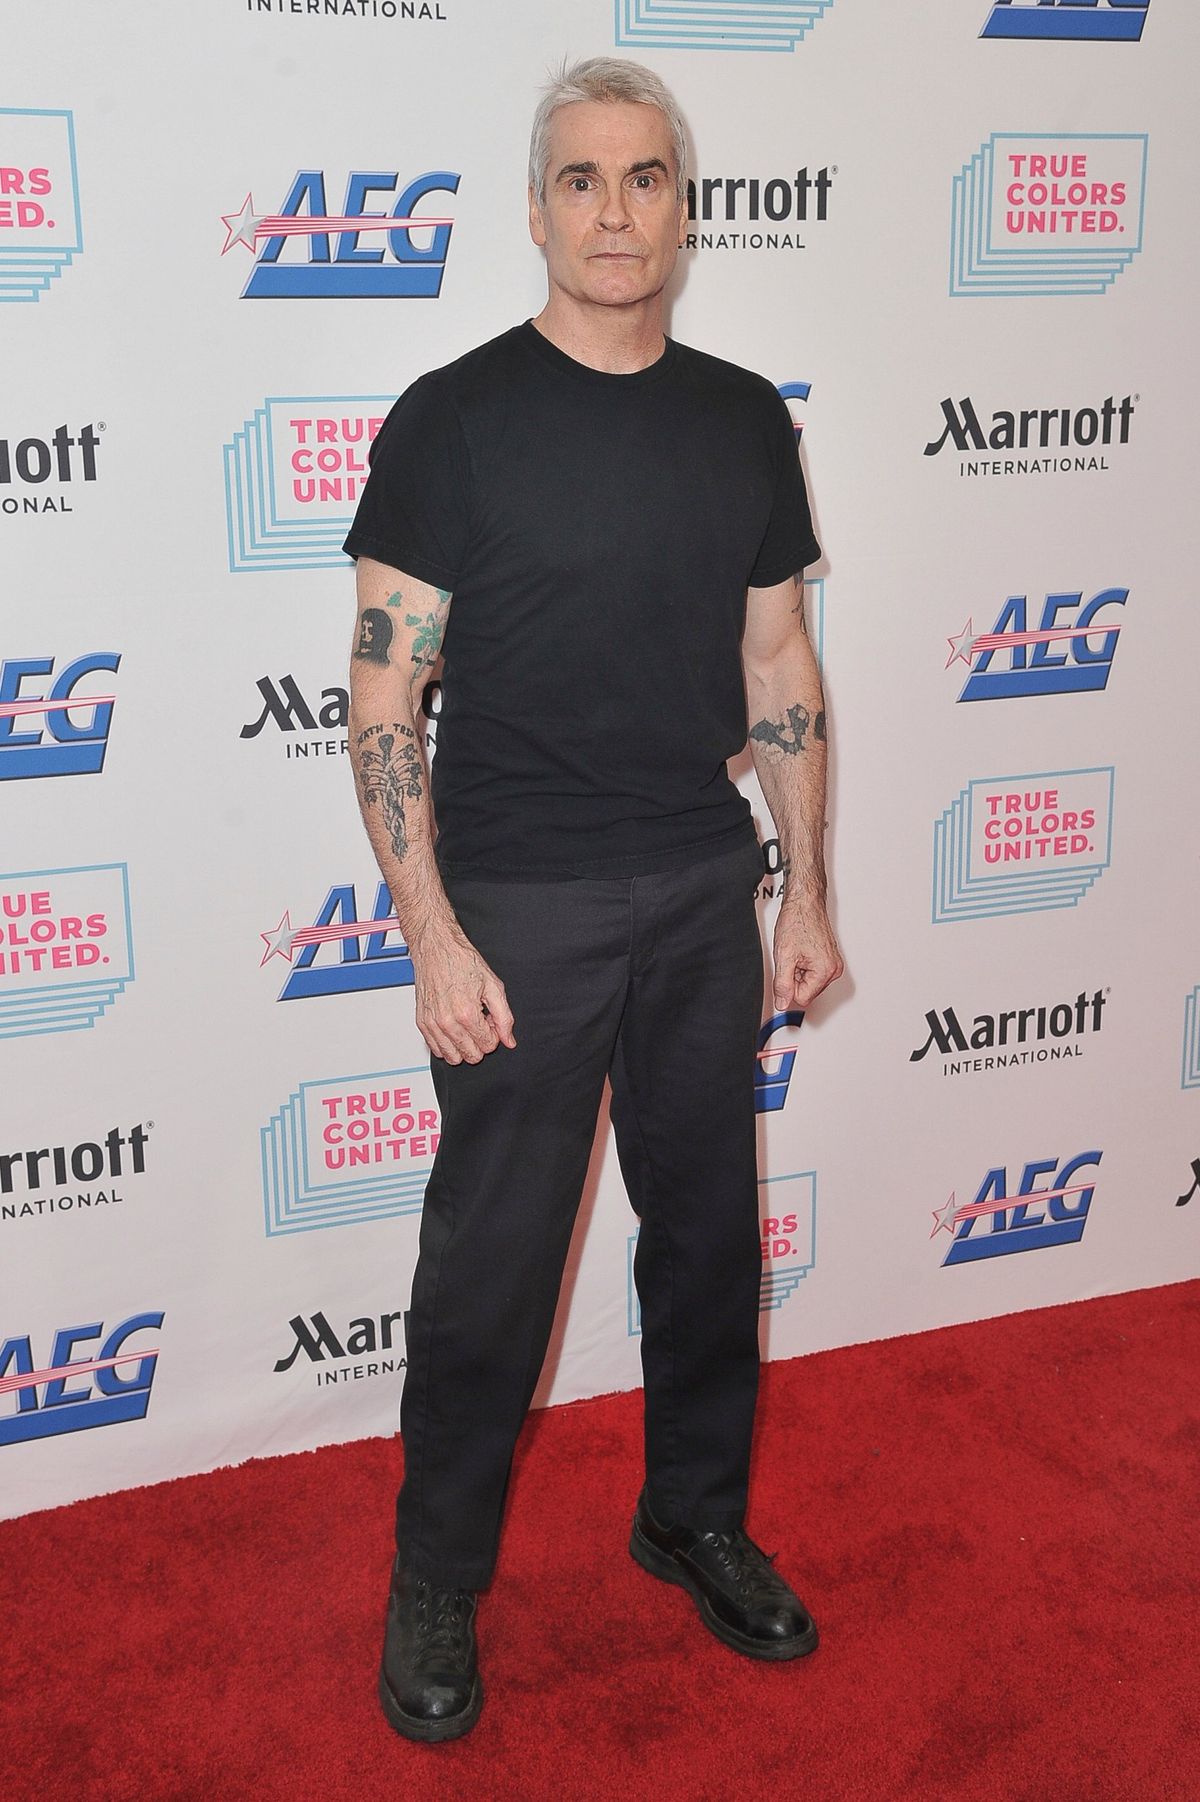 Henry Rollins attends the 9th Annual “Home for the Holidays” benefit concert at the Novo on Dec. 10, 2019, in Los Angeles. The musician, actor, activist and poet headlined Bing Crosby Theater on Wednesday night in downtown Spokane.  (Richard Shotwell/Invision/AP)